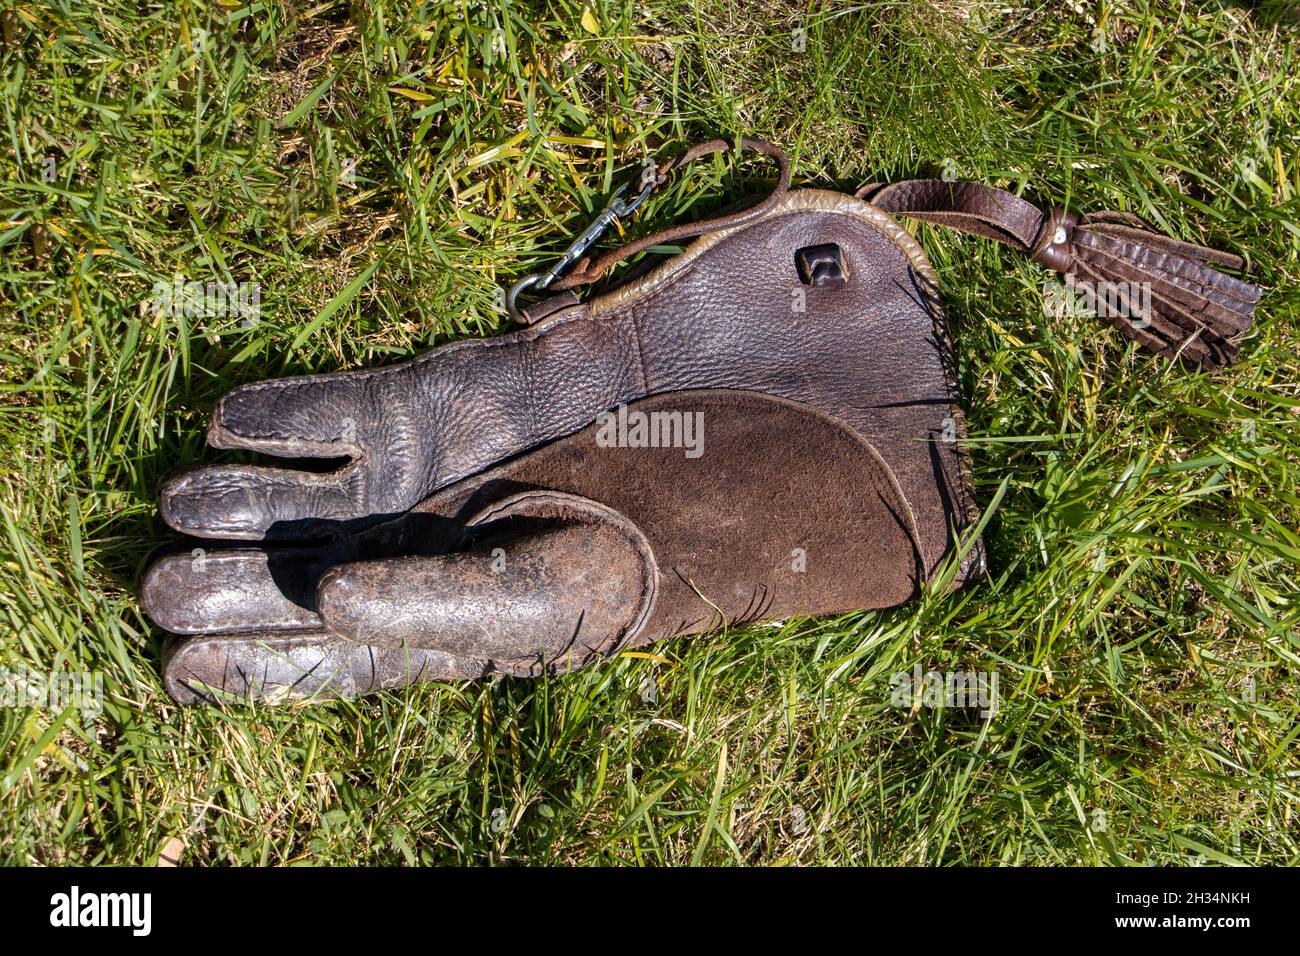 One leather glove with a long cuff for working with birds of prey, lying in green grass. Stock Photo